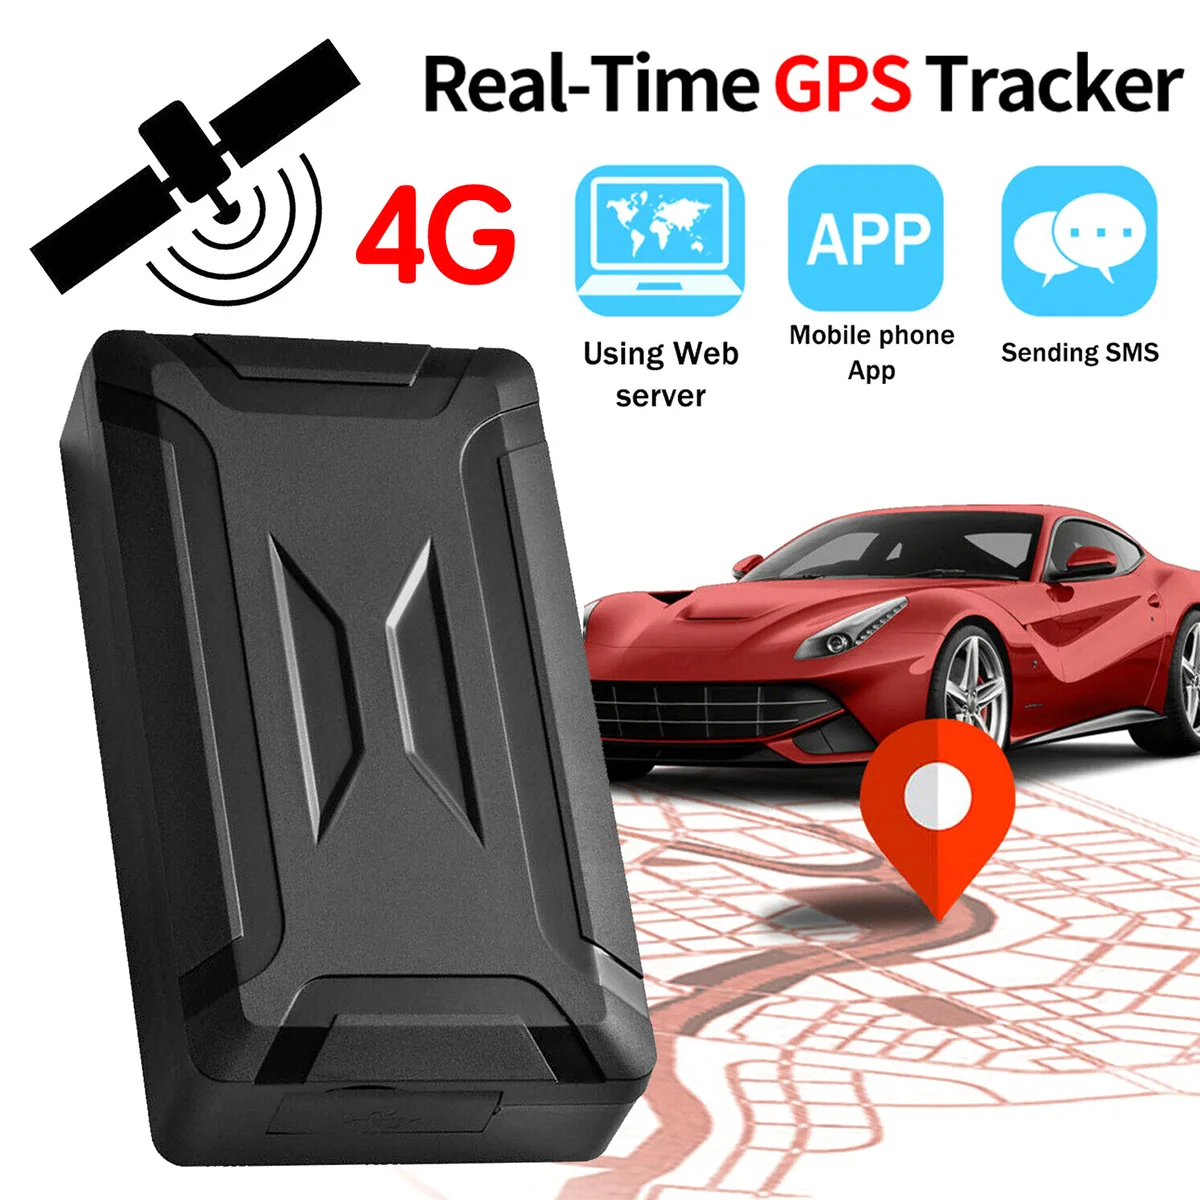 4G GPS Tracker Real-Time GPS Tracking Device Anti Theft Alarm Vehicle Overspeed Tracking Accurate GPS Locator for Vehicle Cars